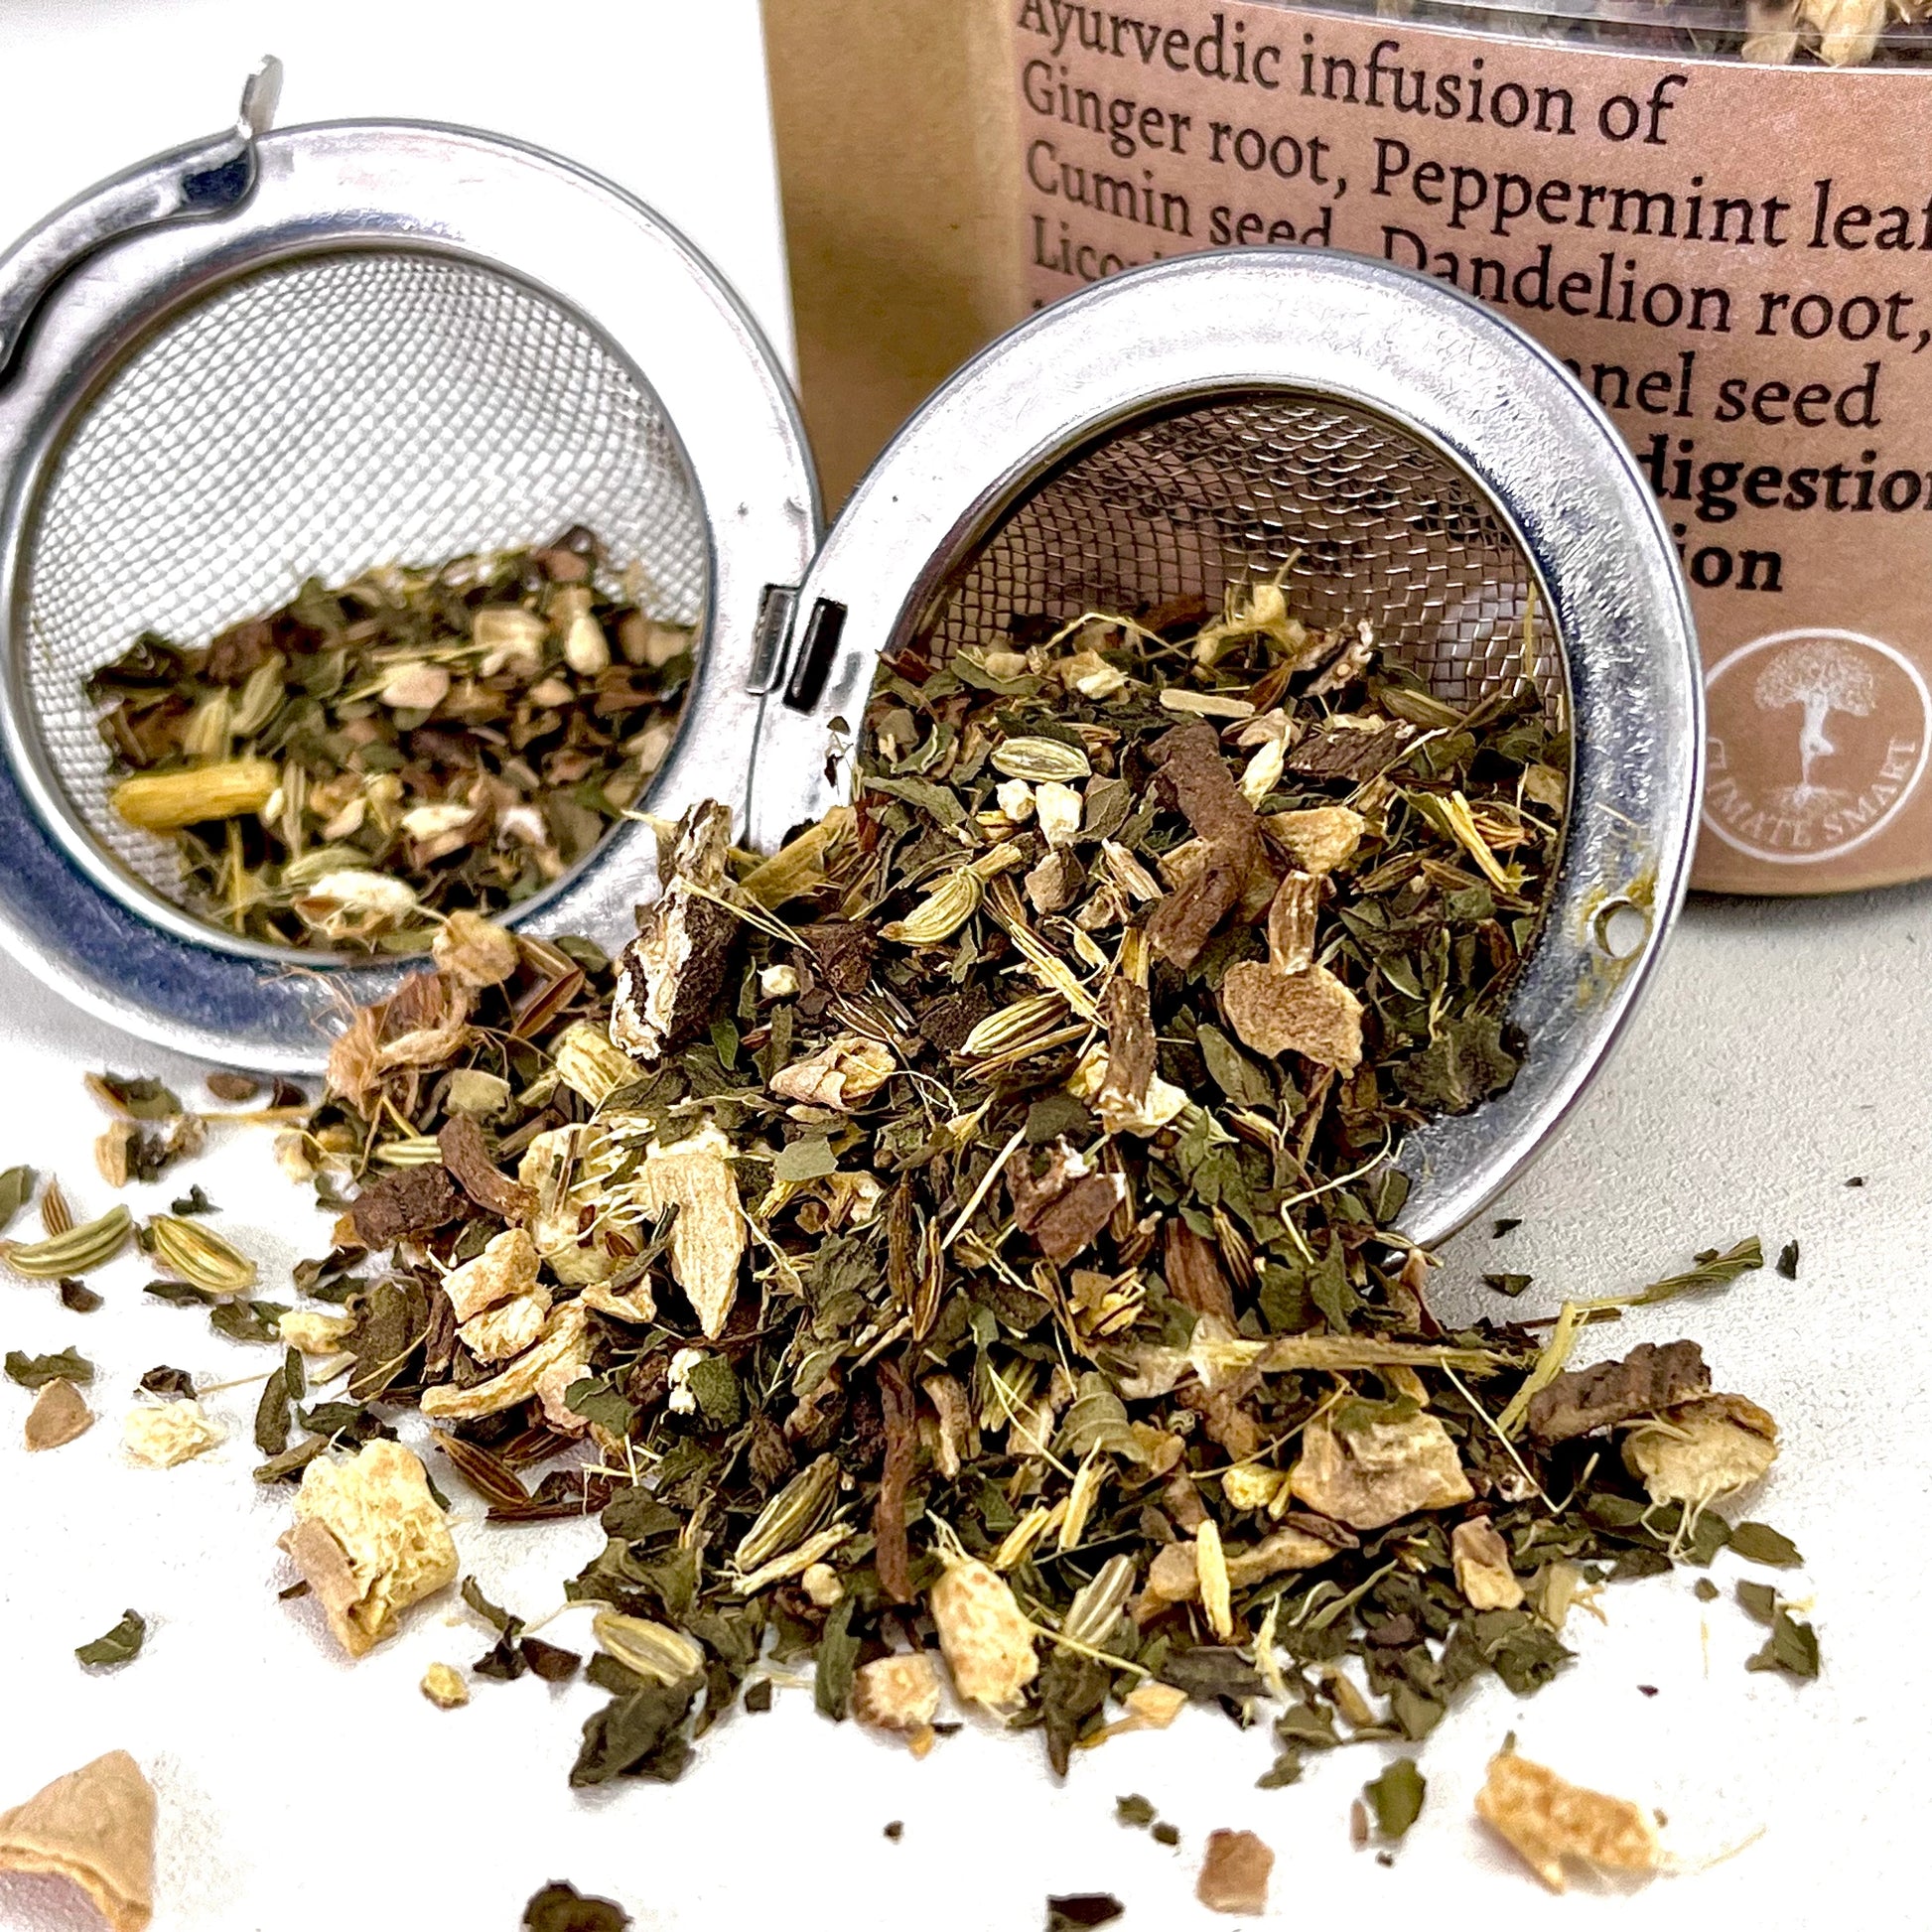 Digest loose leaf tea with Ginger, Peppermint, Cumin, Dandelion, Licorice, & Fennel in an open tea ball strainer.